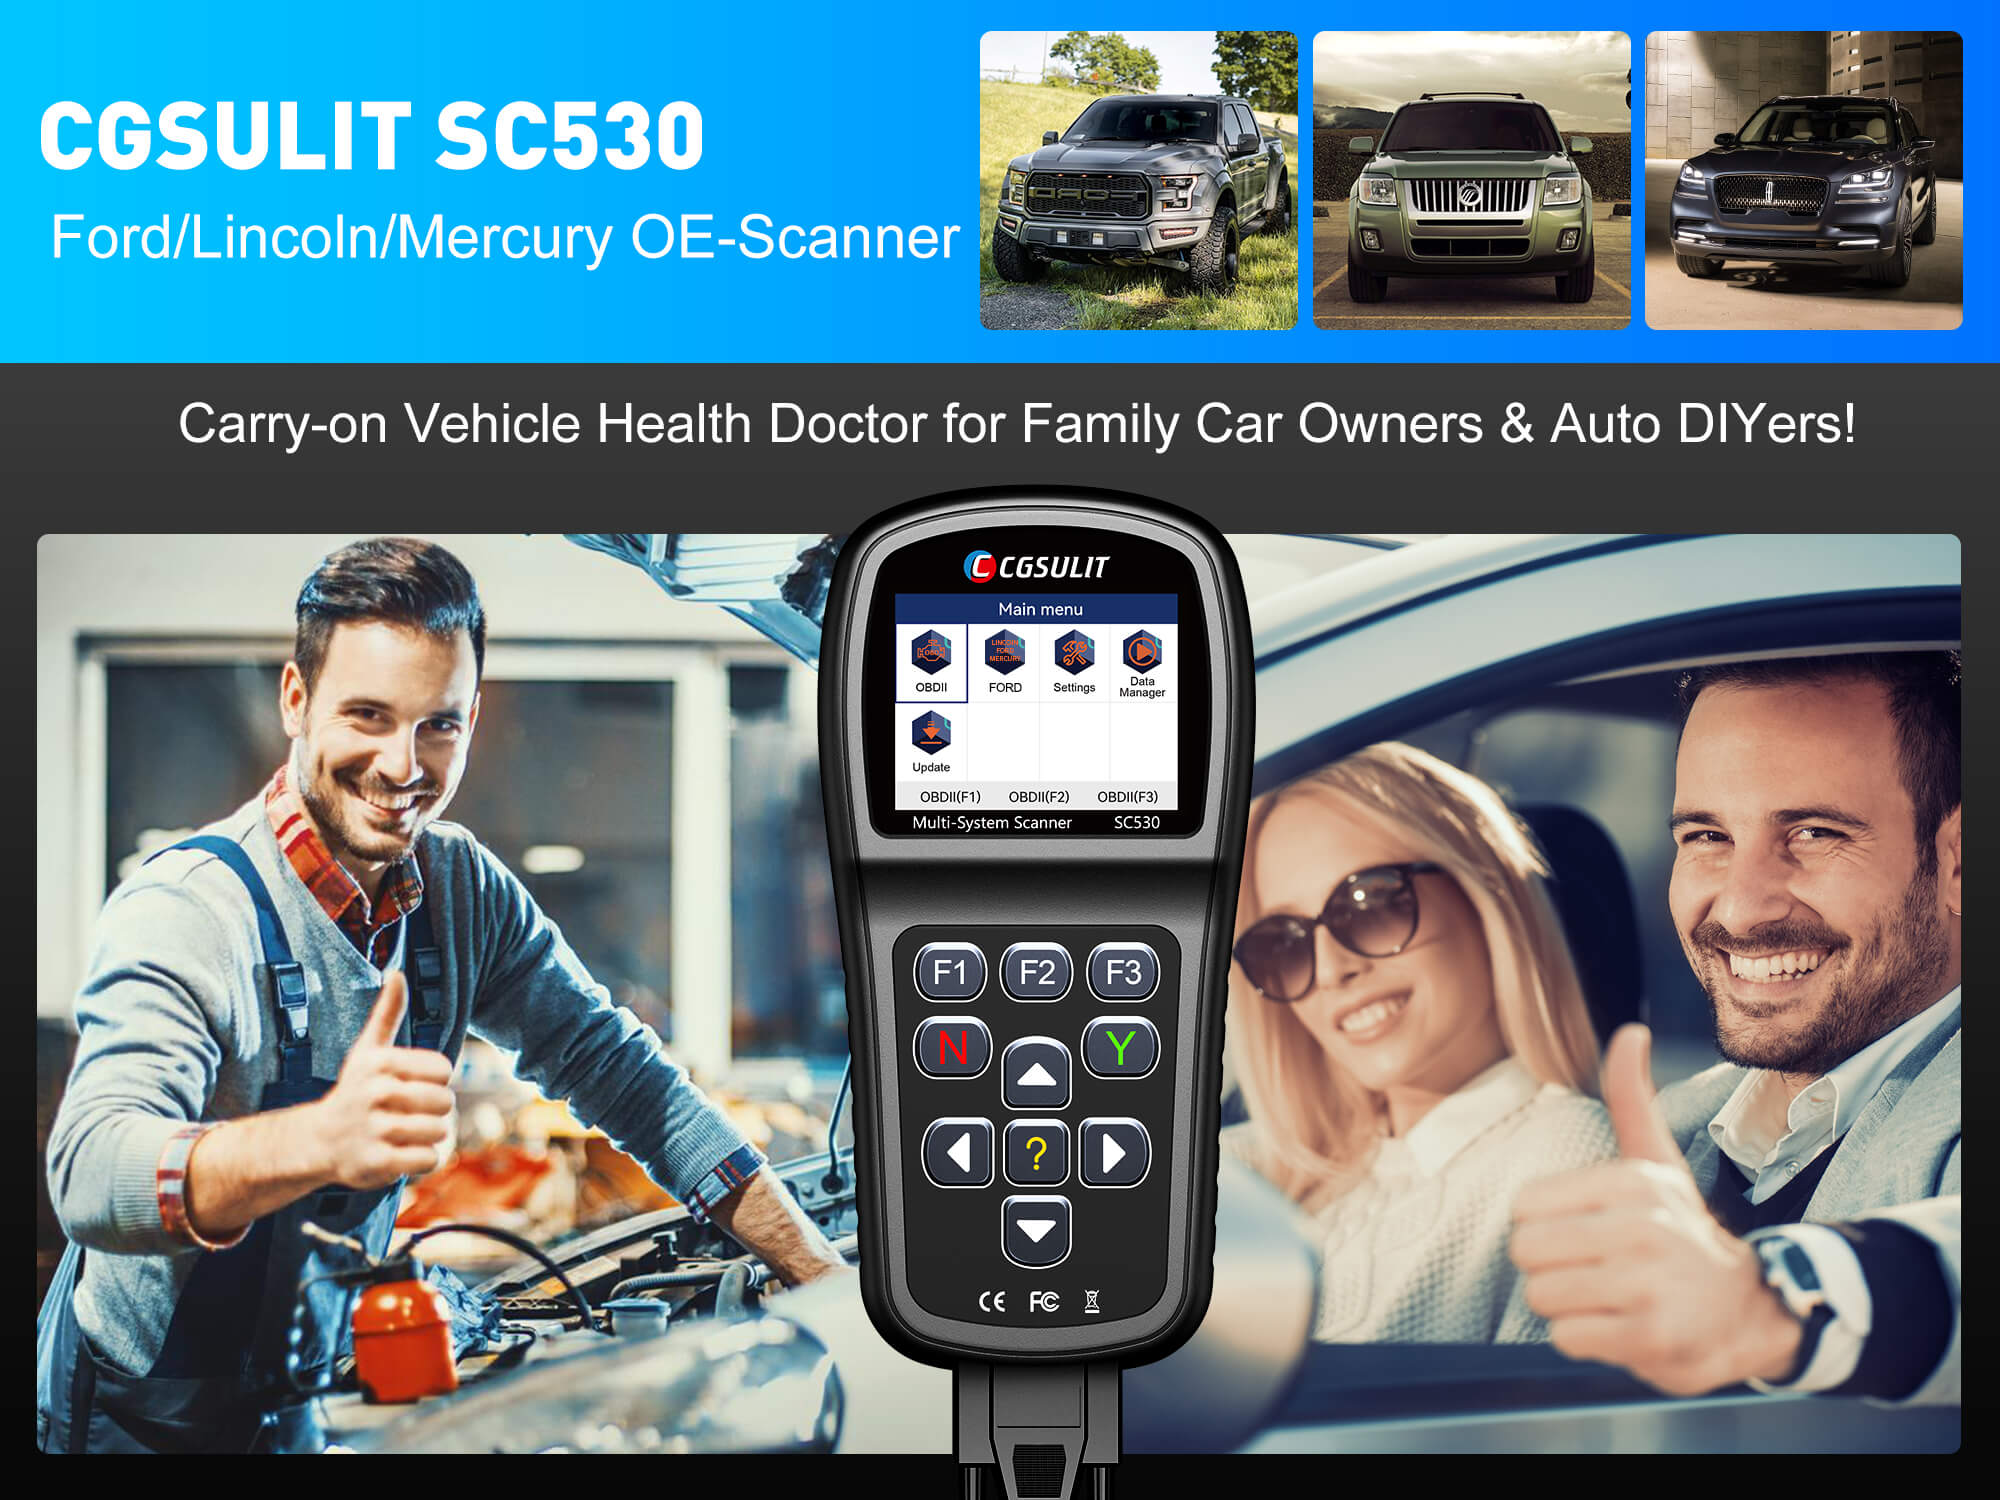 CGSULIT SC530 is a perfect carry-on vehicle health doctor for family car owners&auto DIYlers.